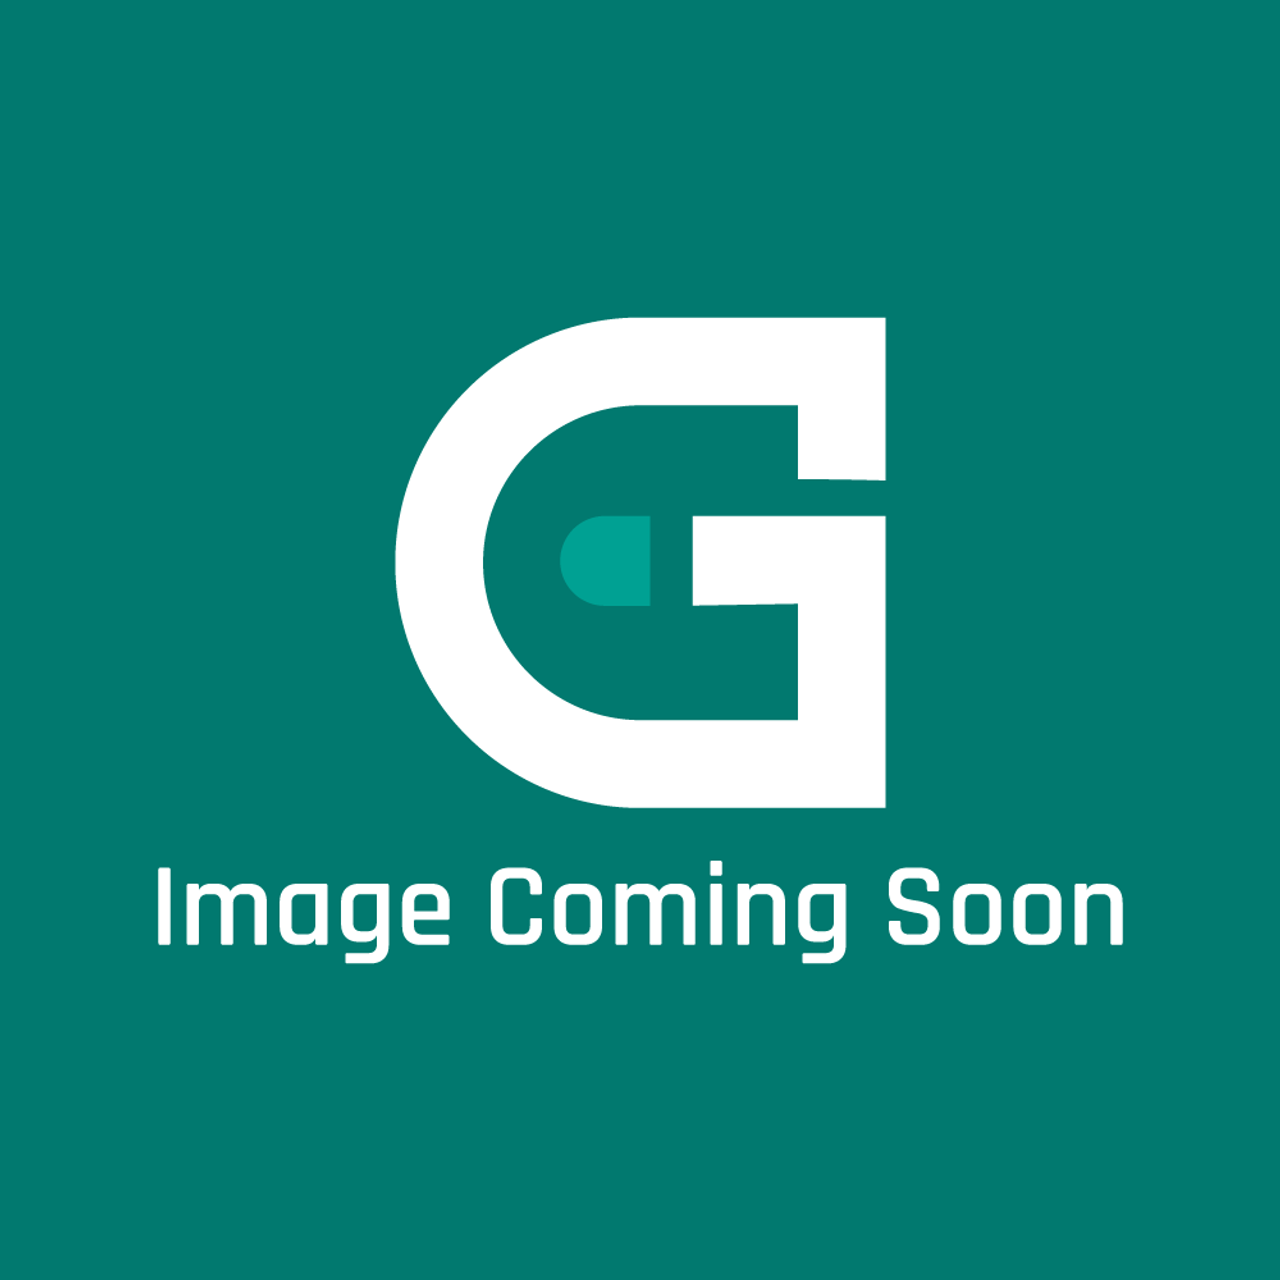 Frigidaire - Electrolux 5304533601 Grate - Image Coming Soon!